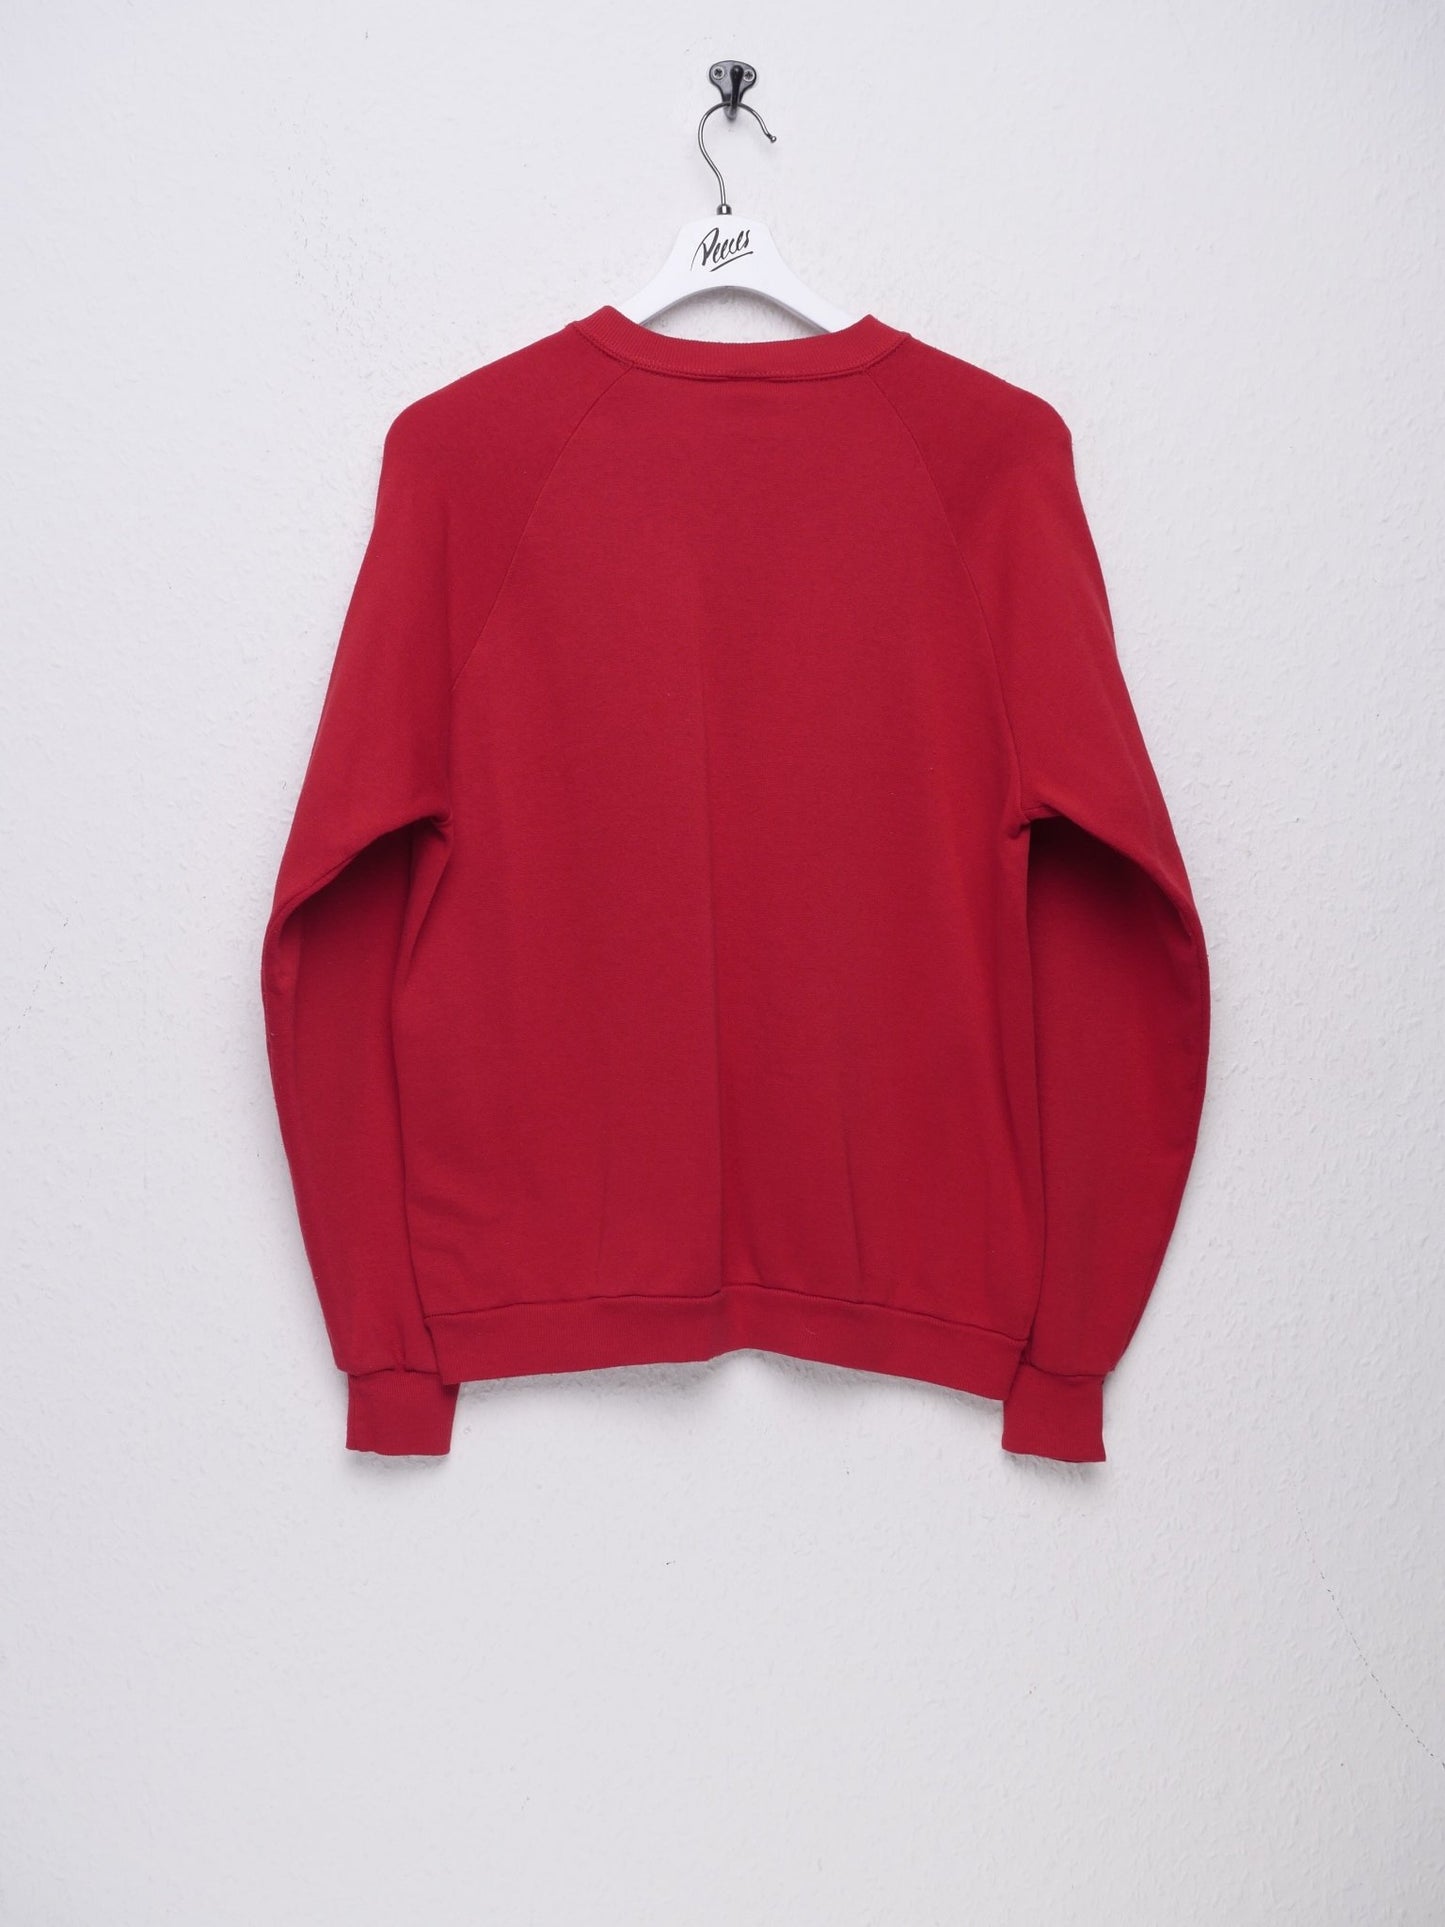 Vintage printed Graphic red Sweater - Peeces